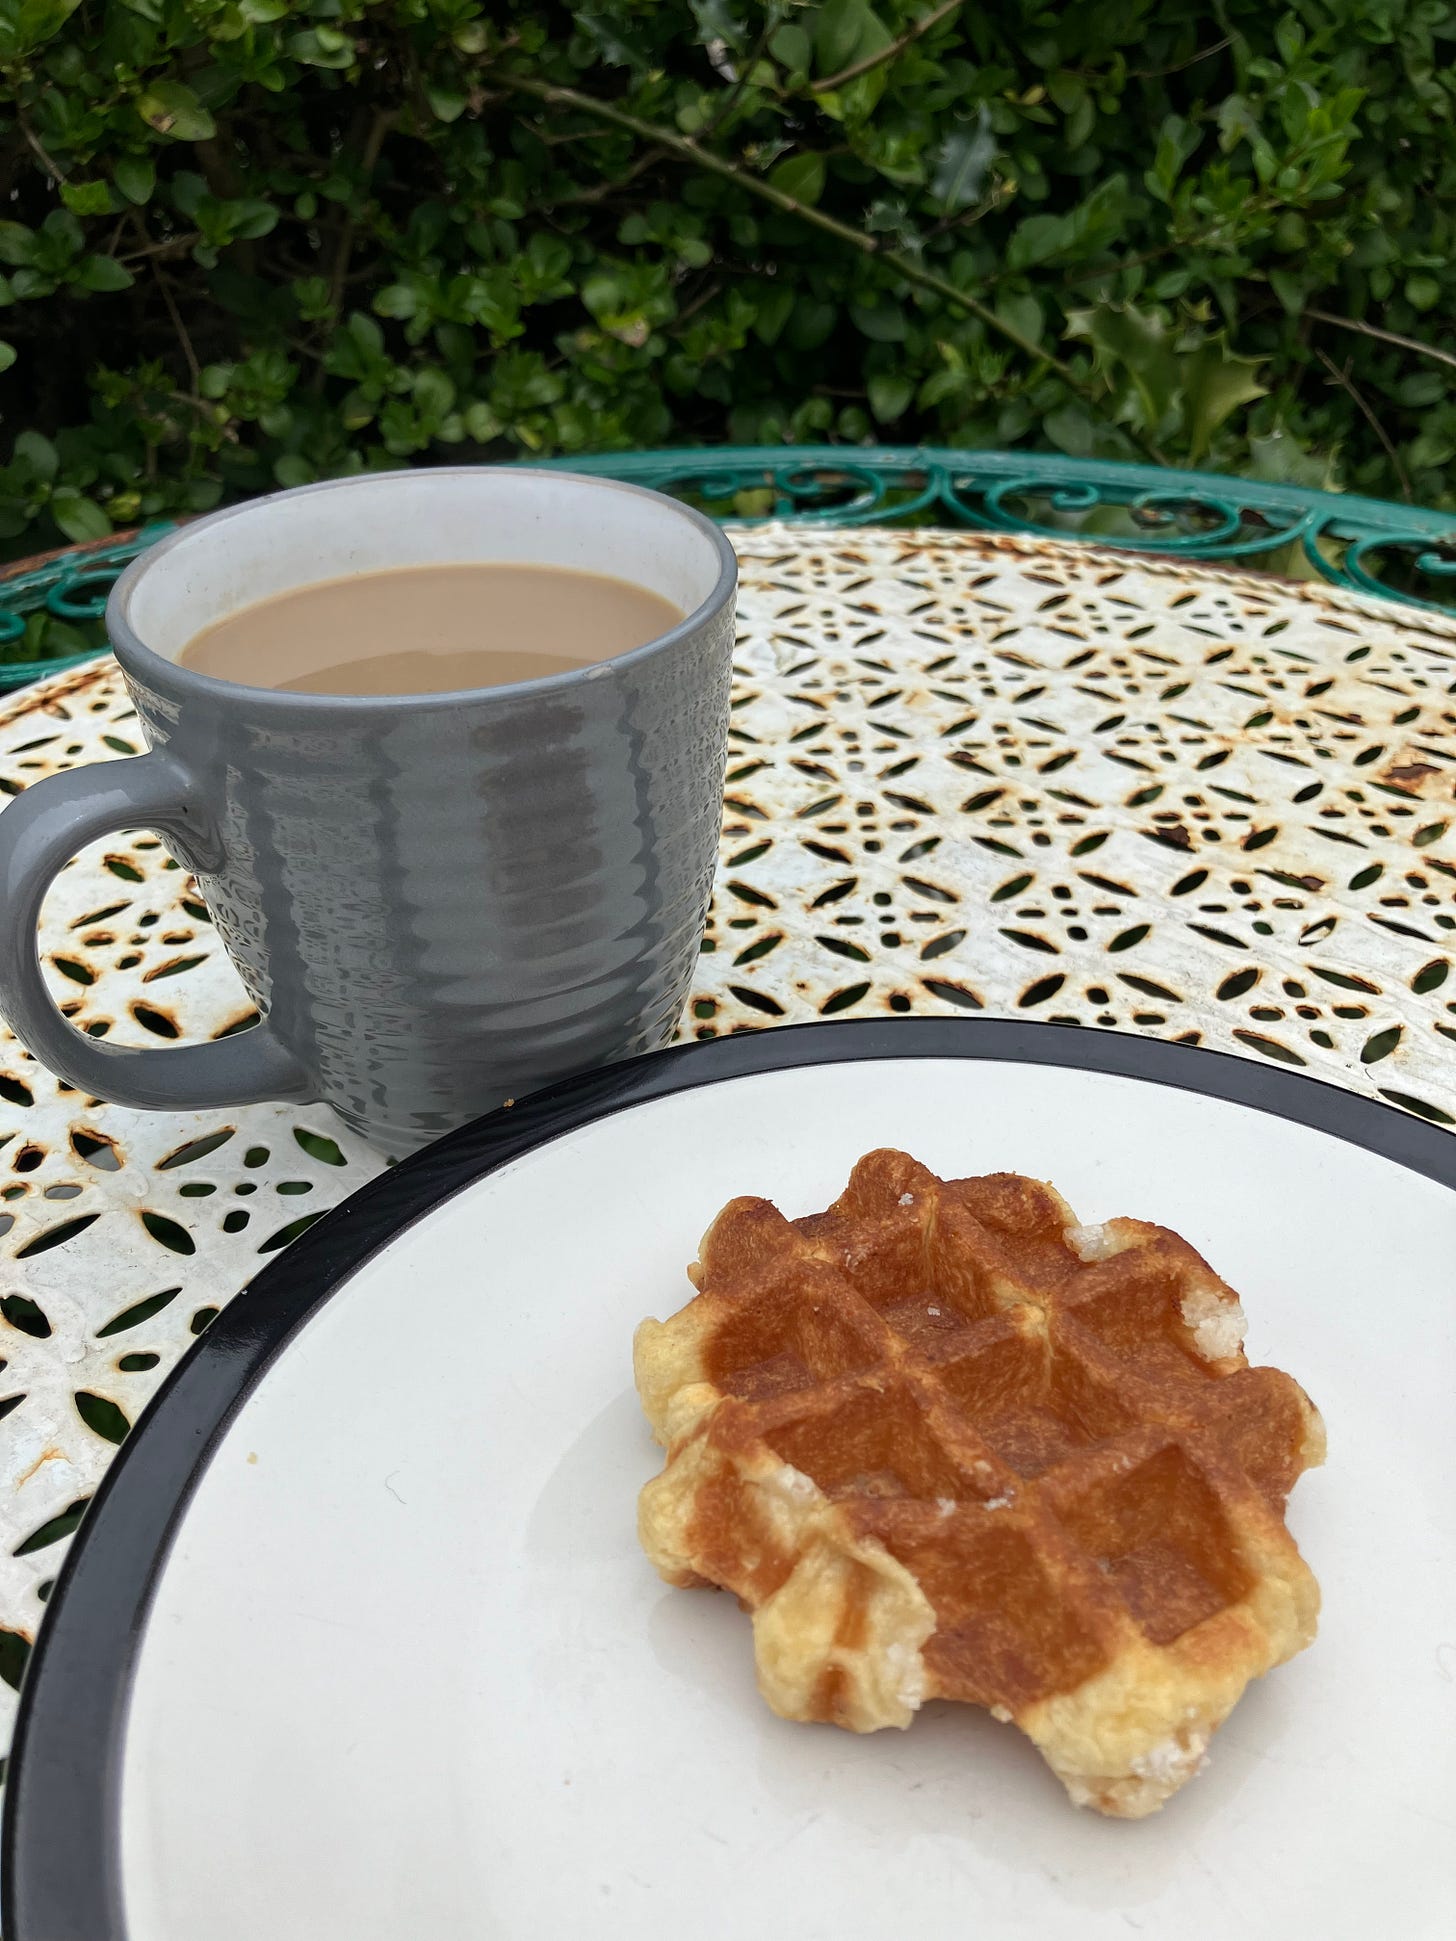 On a white and green garden table, sits a grey mug of coffee and a sugar waffle on a black rimmed plate.